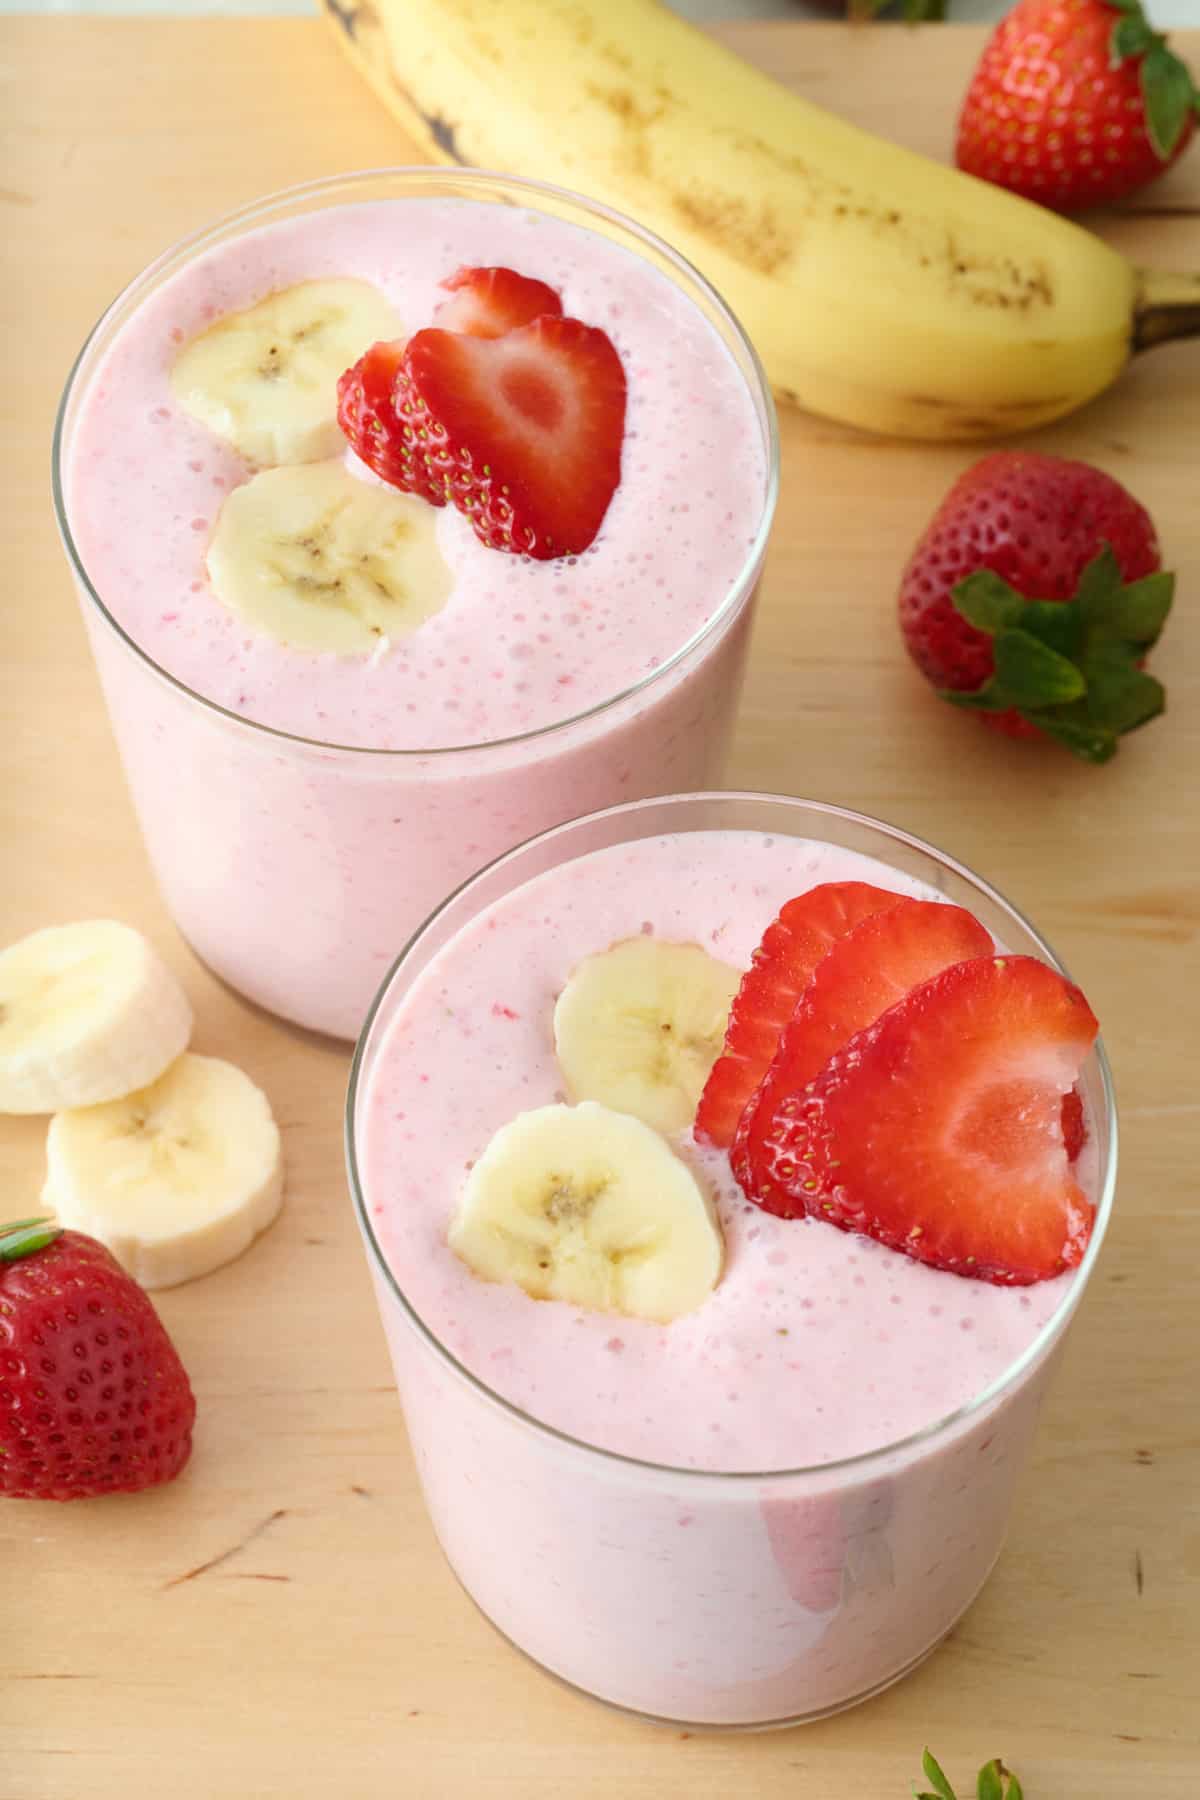 Two glasses of strawberry banana smoothie garnished with extra sliced fruit on top.